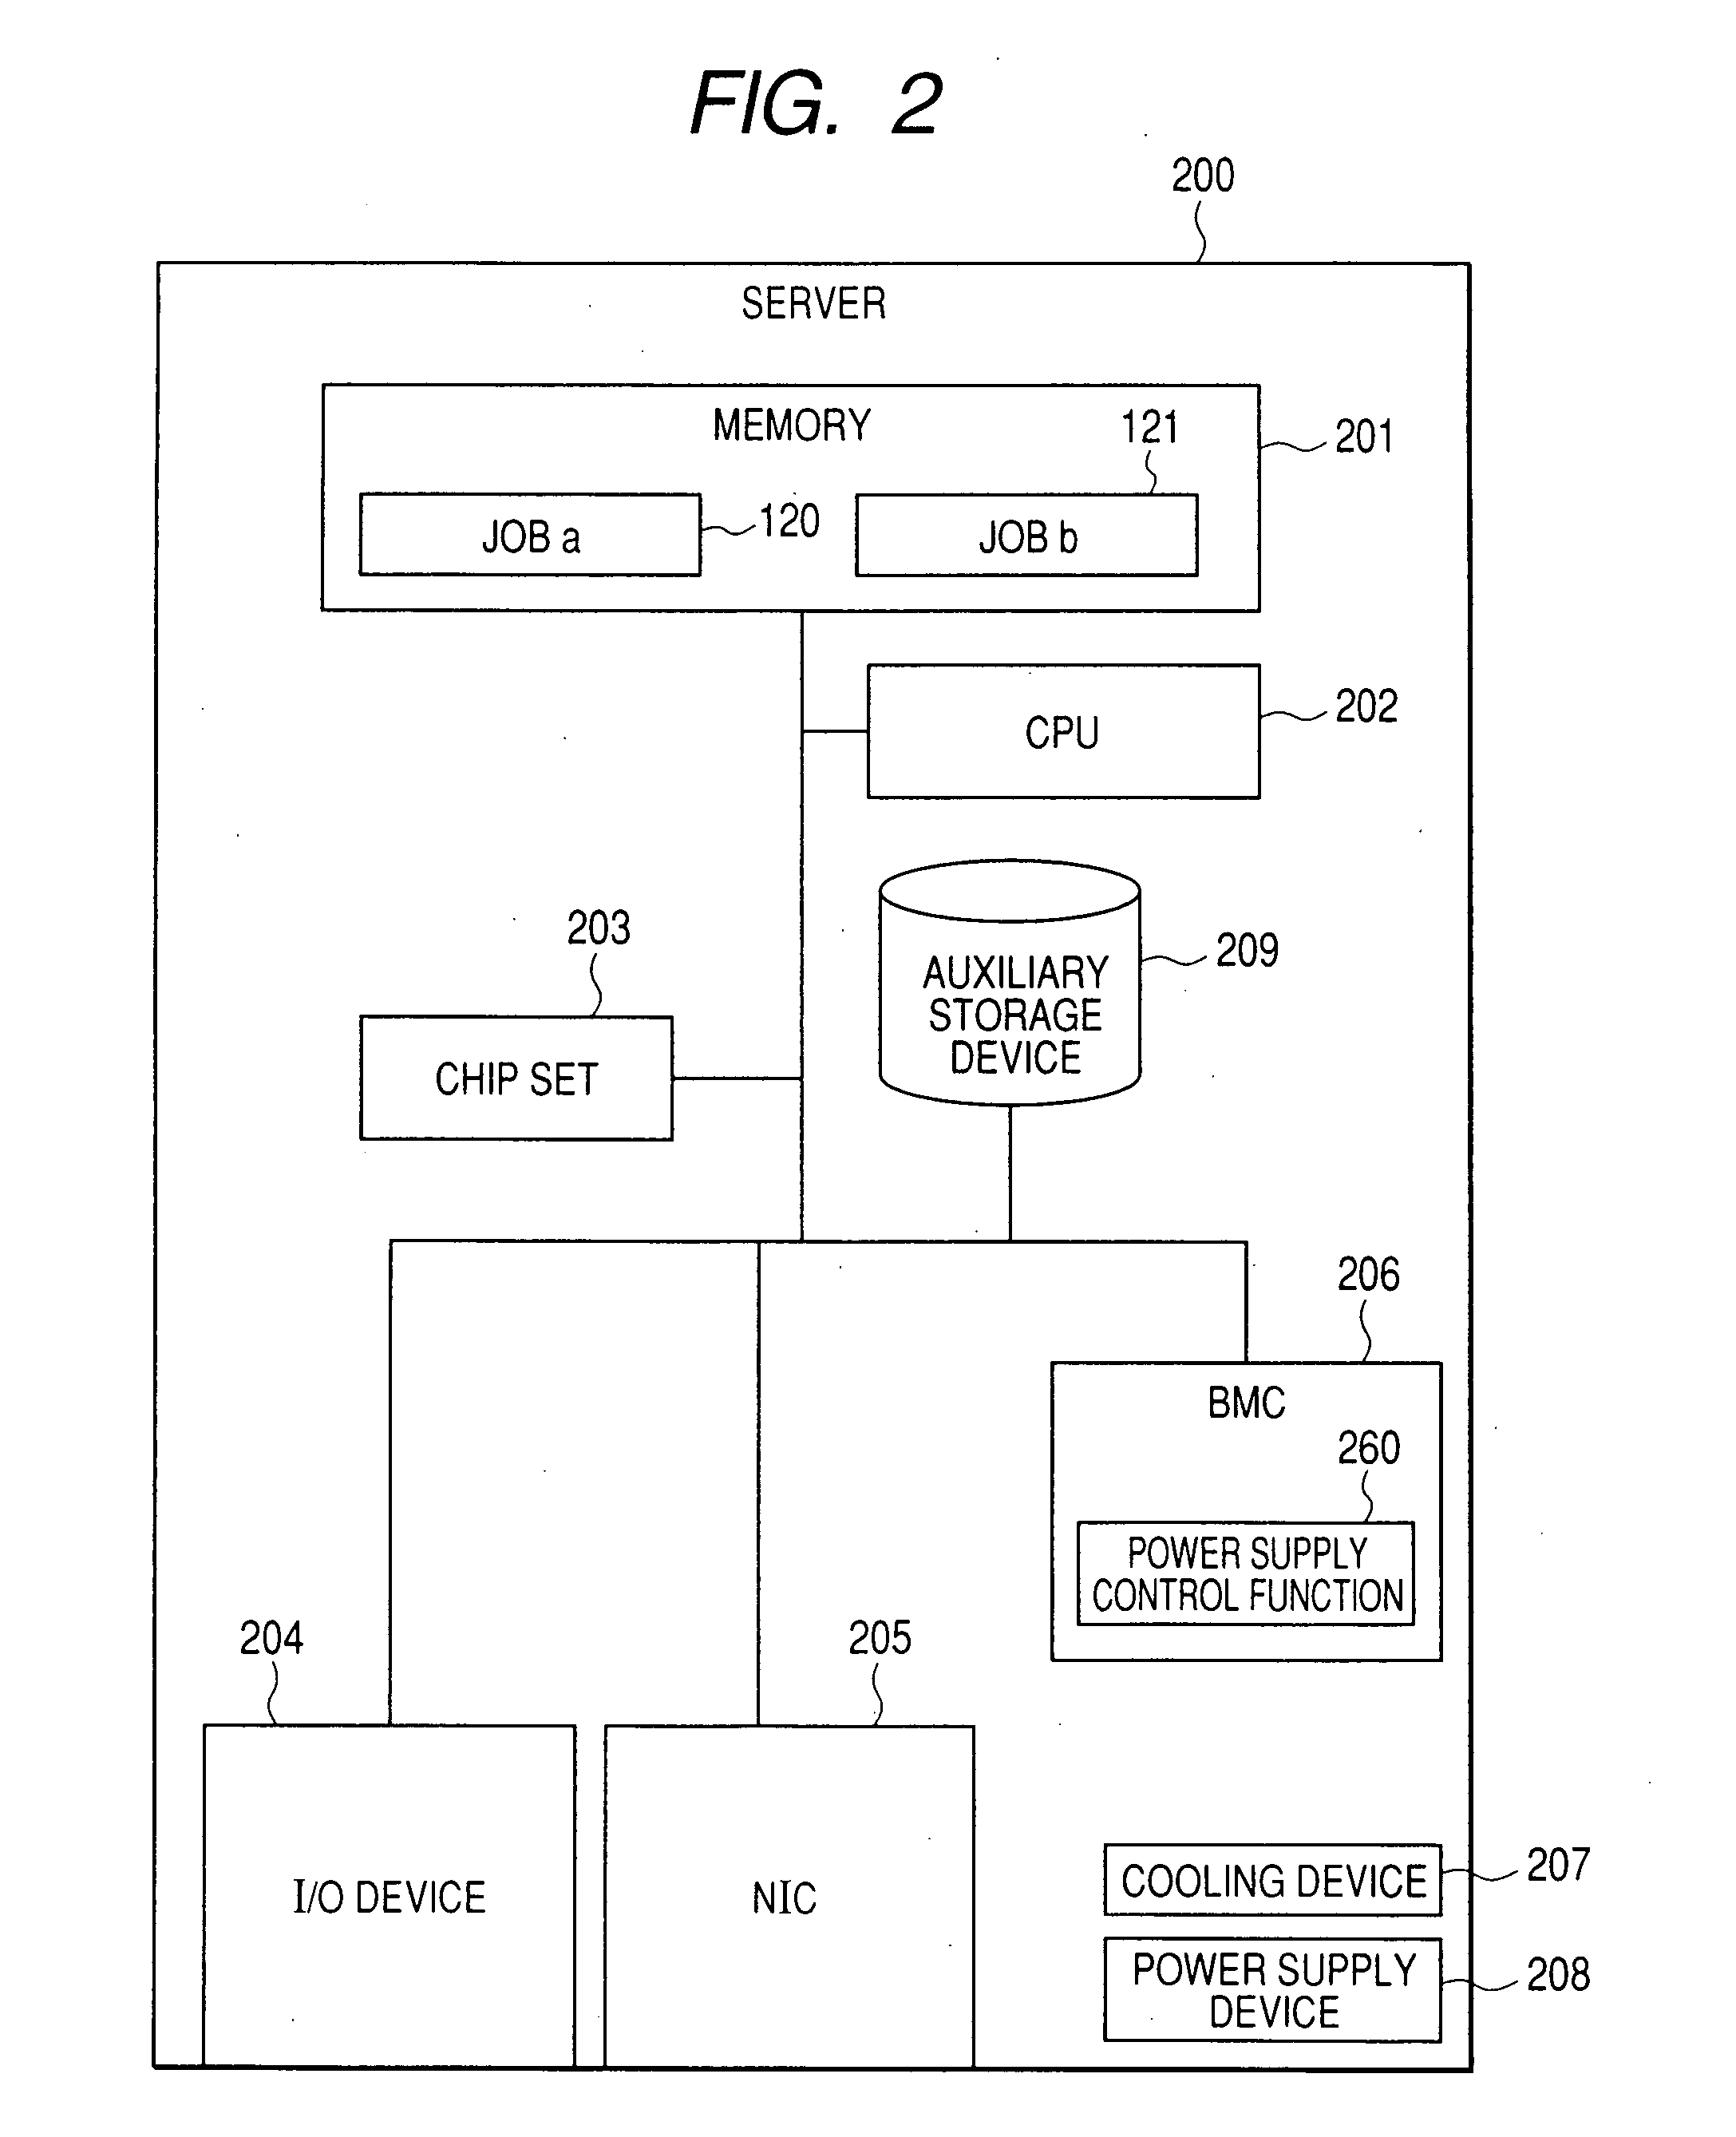 Method and computer program for reducing power consumption of a computing system